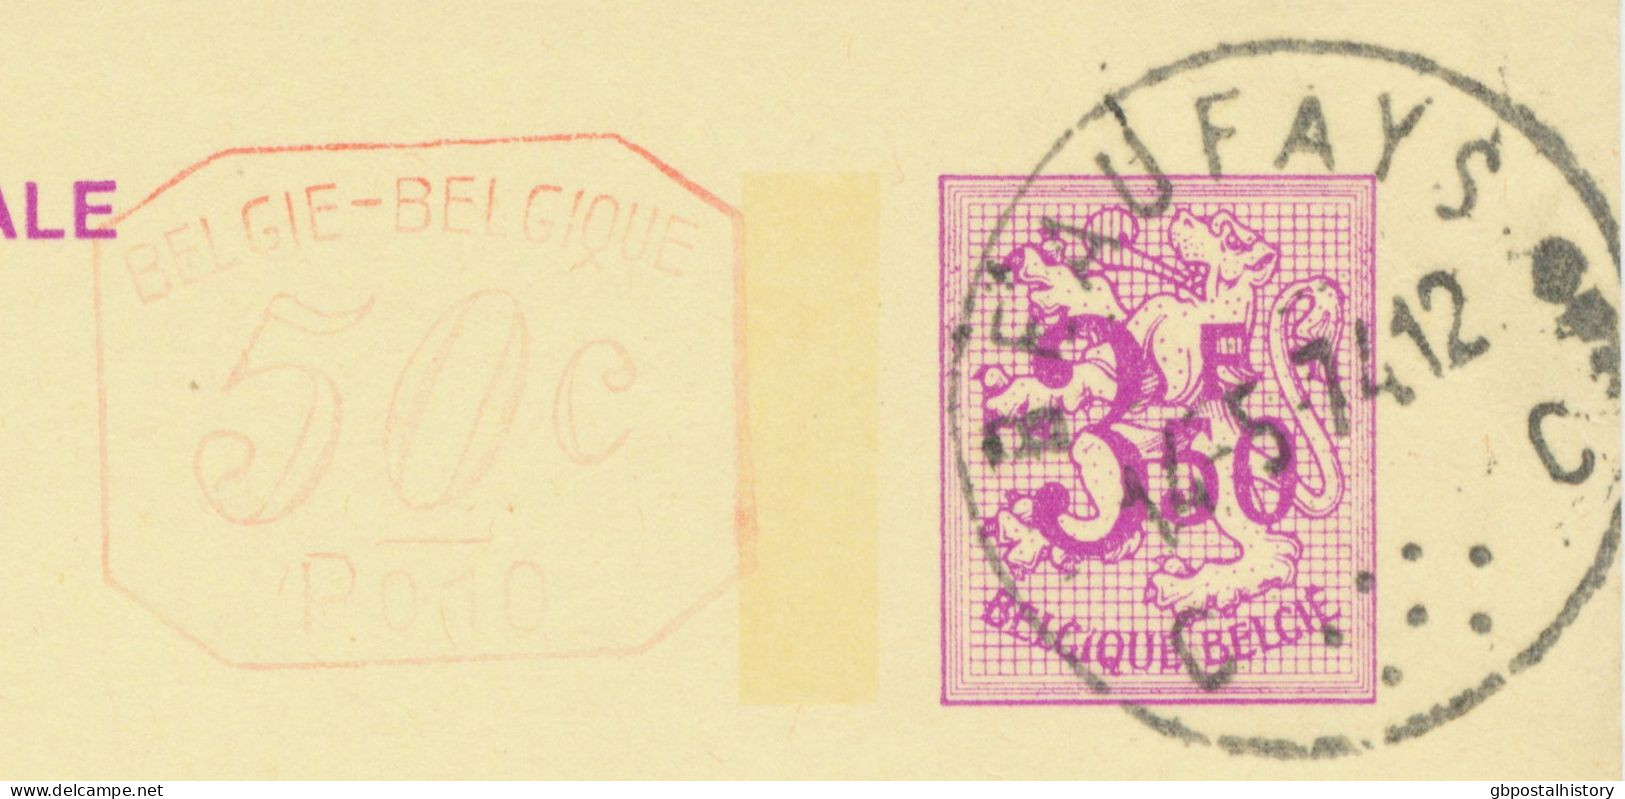 BELGIUM VILLAGE POSTMARKS  BEAUFAYS C (now Chaudfontaine) SC With Dots 1974 (Postal Stationery 3,50 + 0,50 F, PUBLIBEL 2 - Postmarks - Points